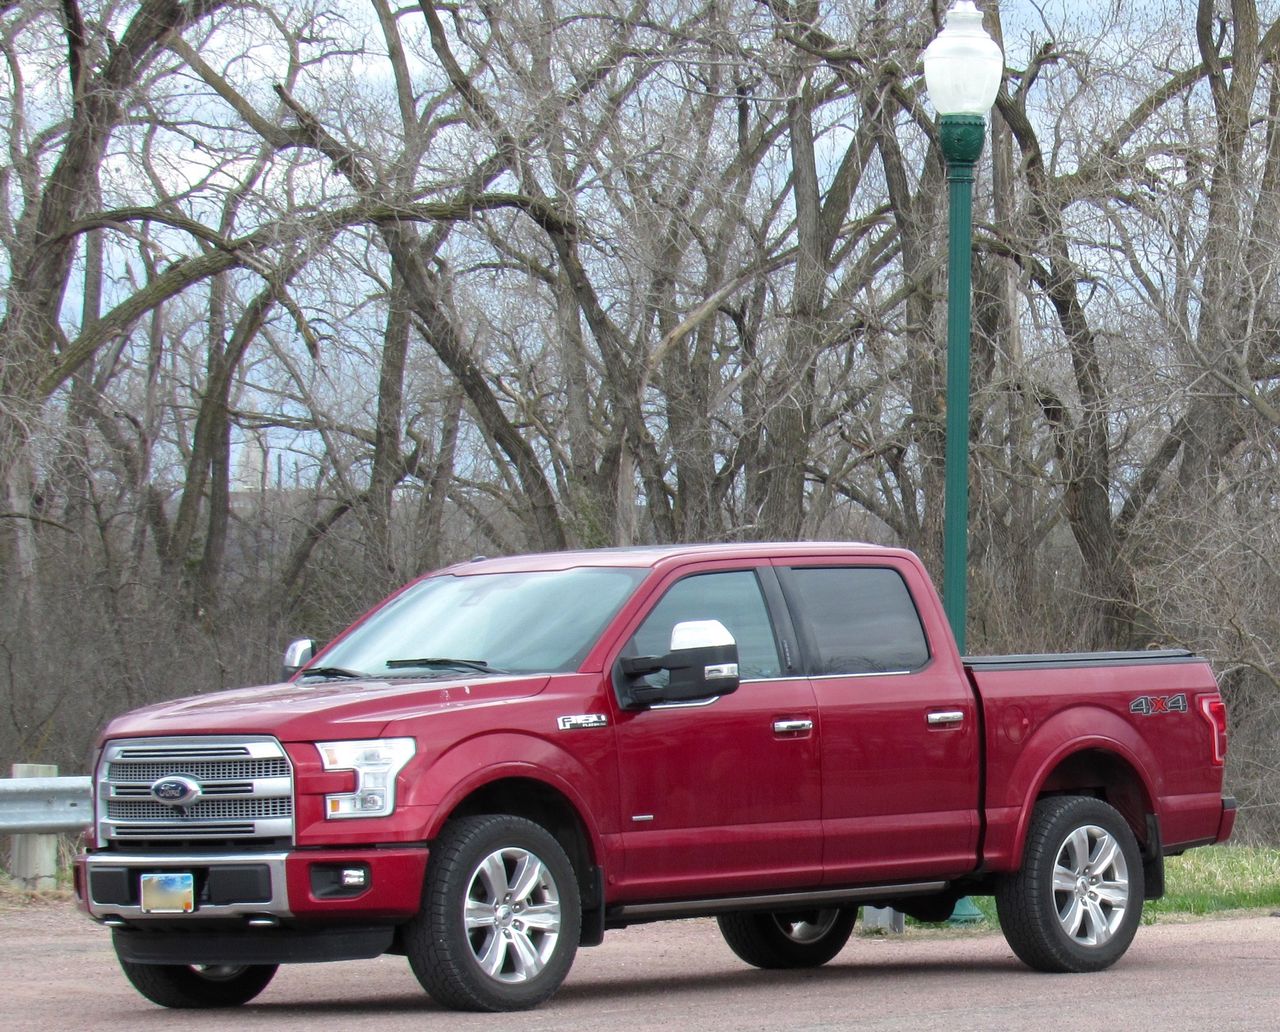 2015 Ford F-150 Platinum | Sioux Falls, SD, Ruby Red Metallic Tinted Clearcoat (Red & Orange), 4x4